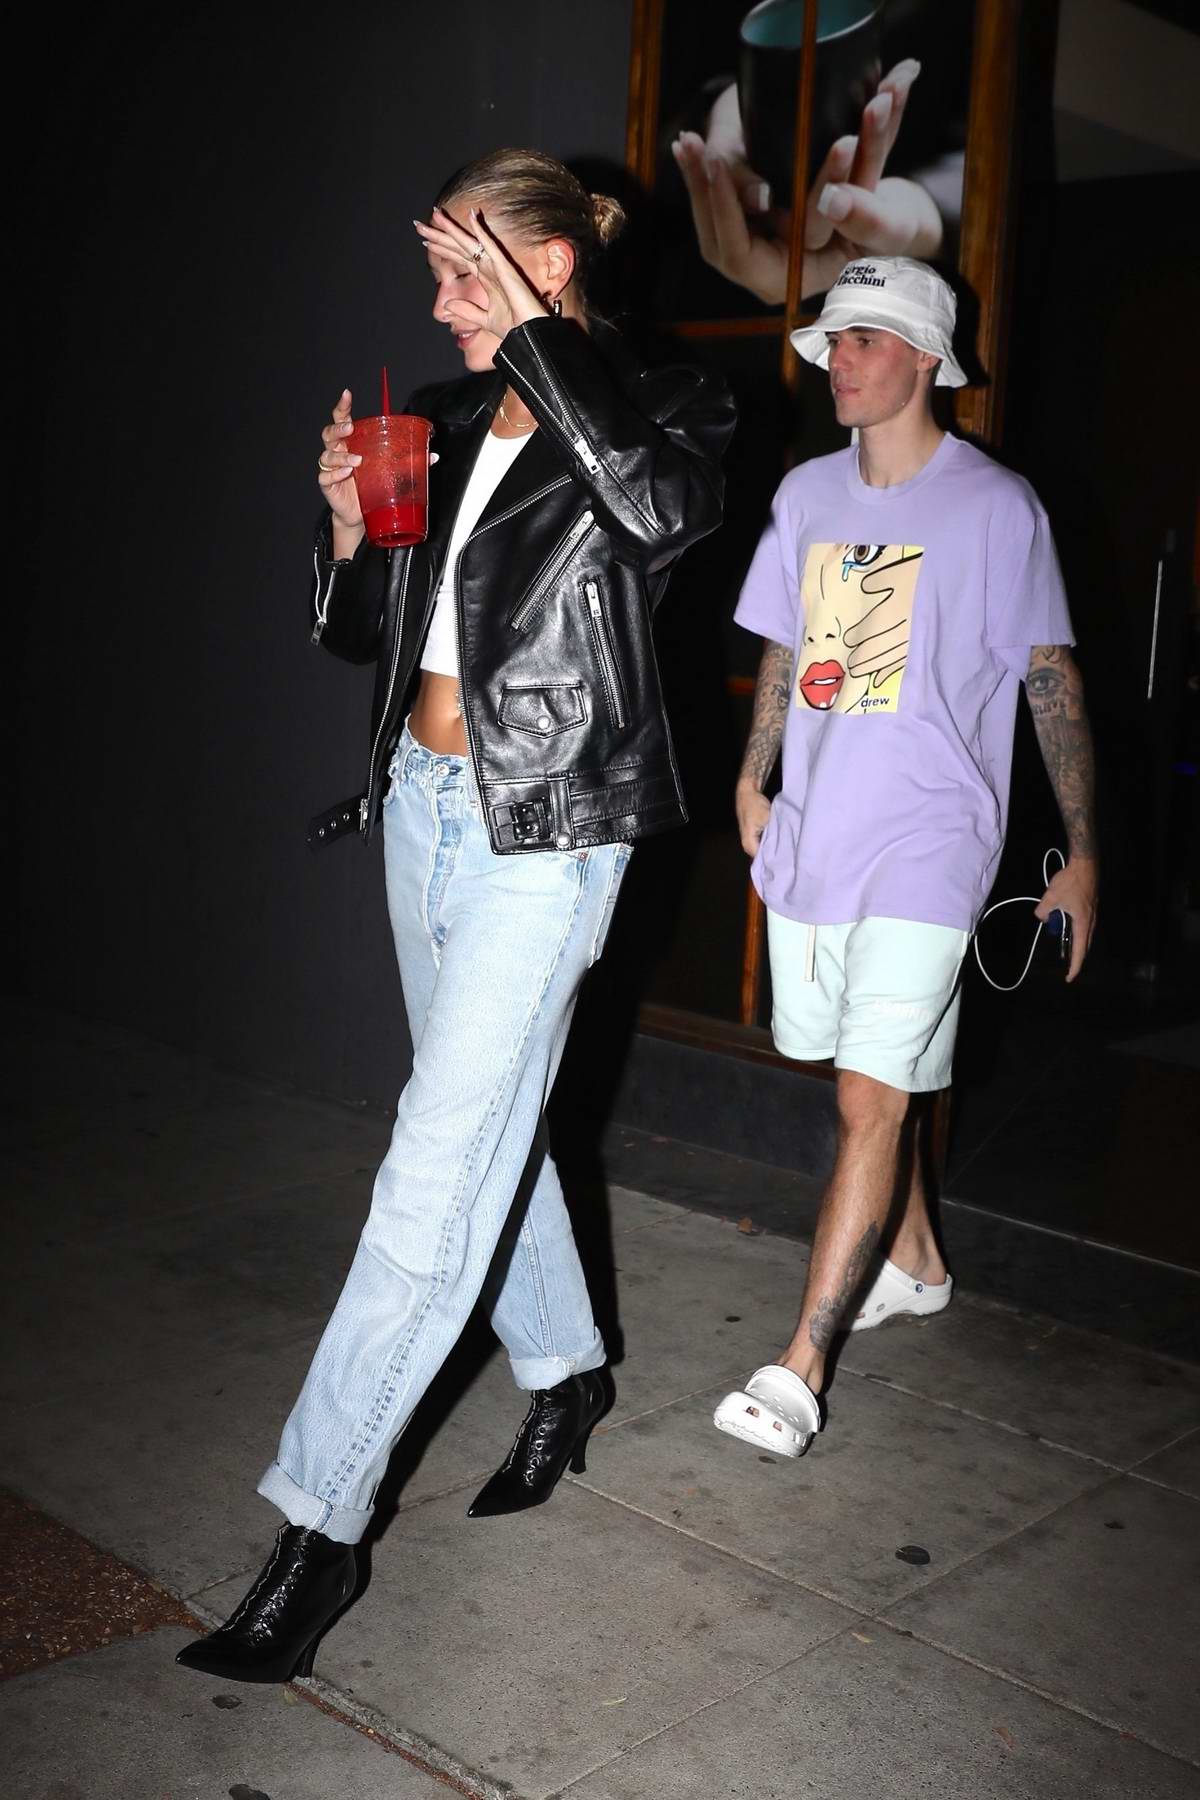 Hailey leaving Voda Spa in West Hollywood// July 25, 2021